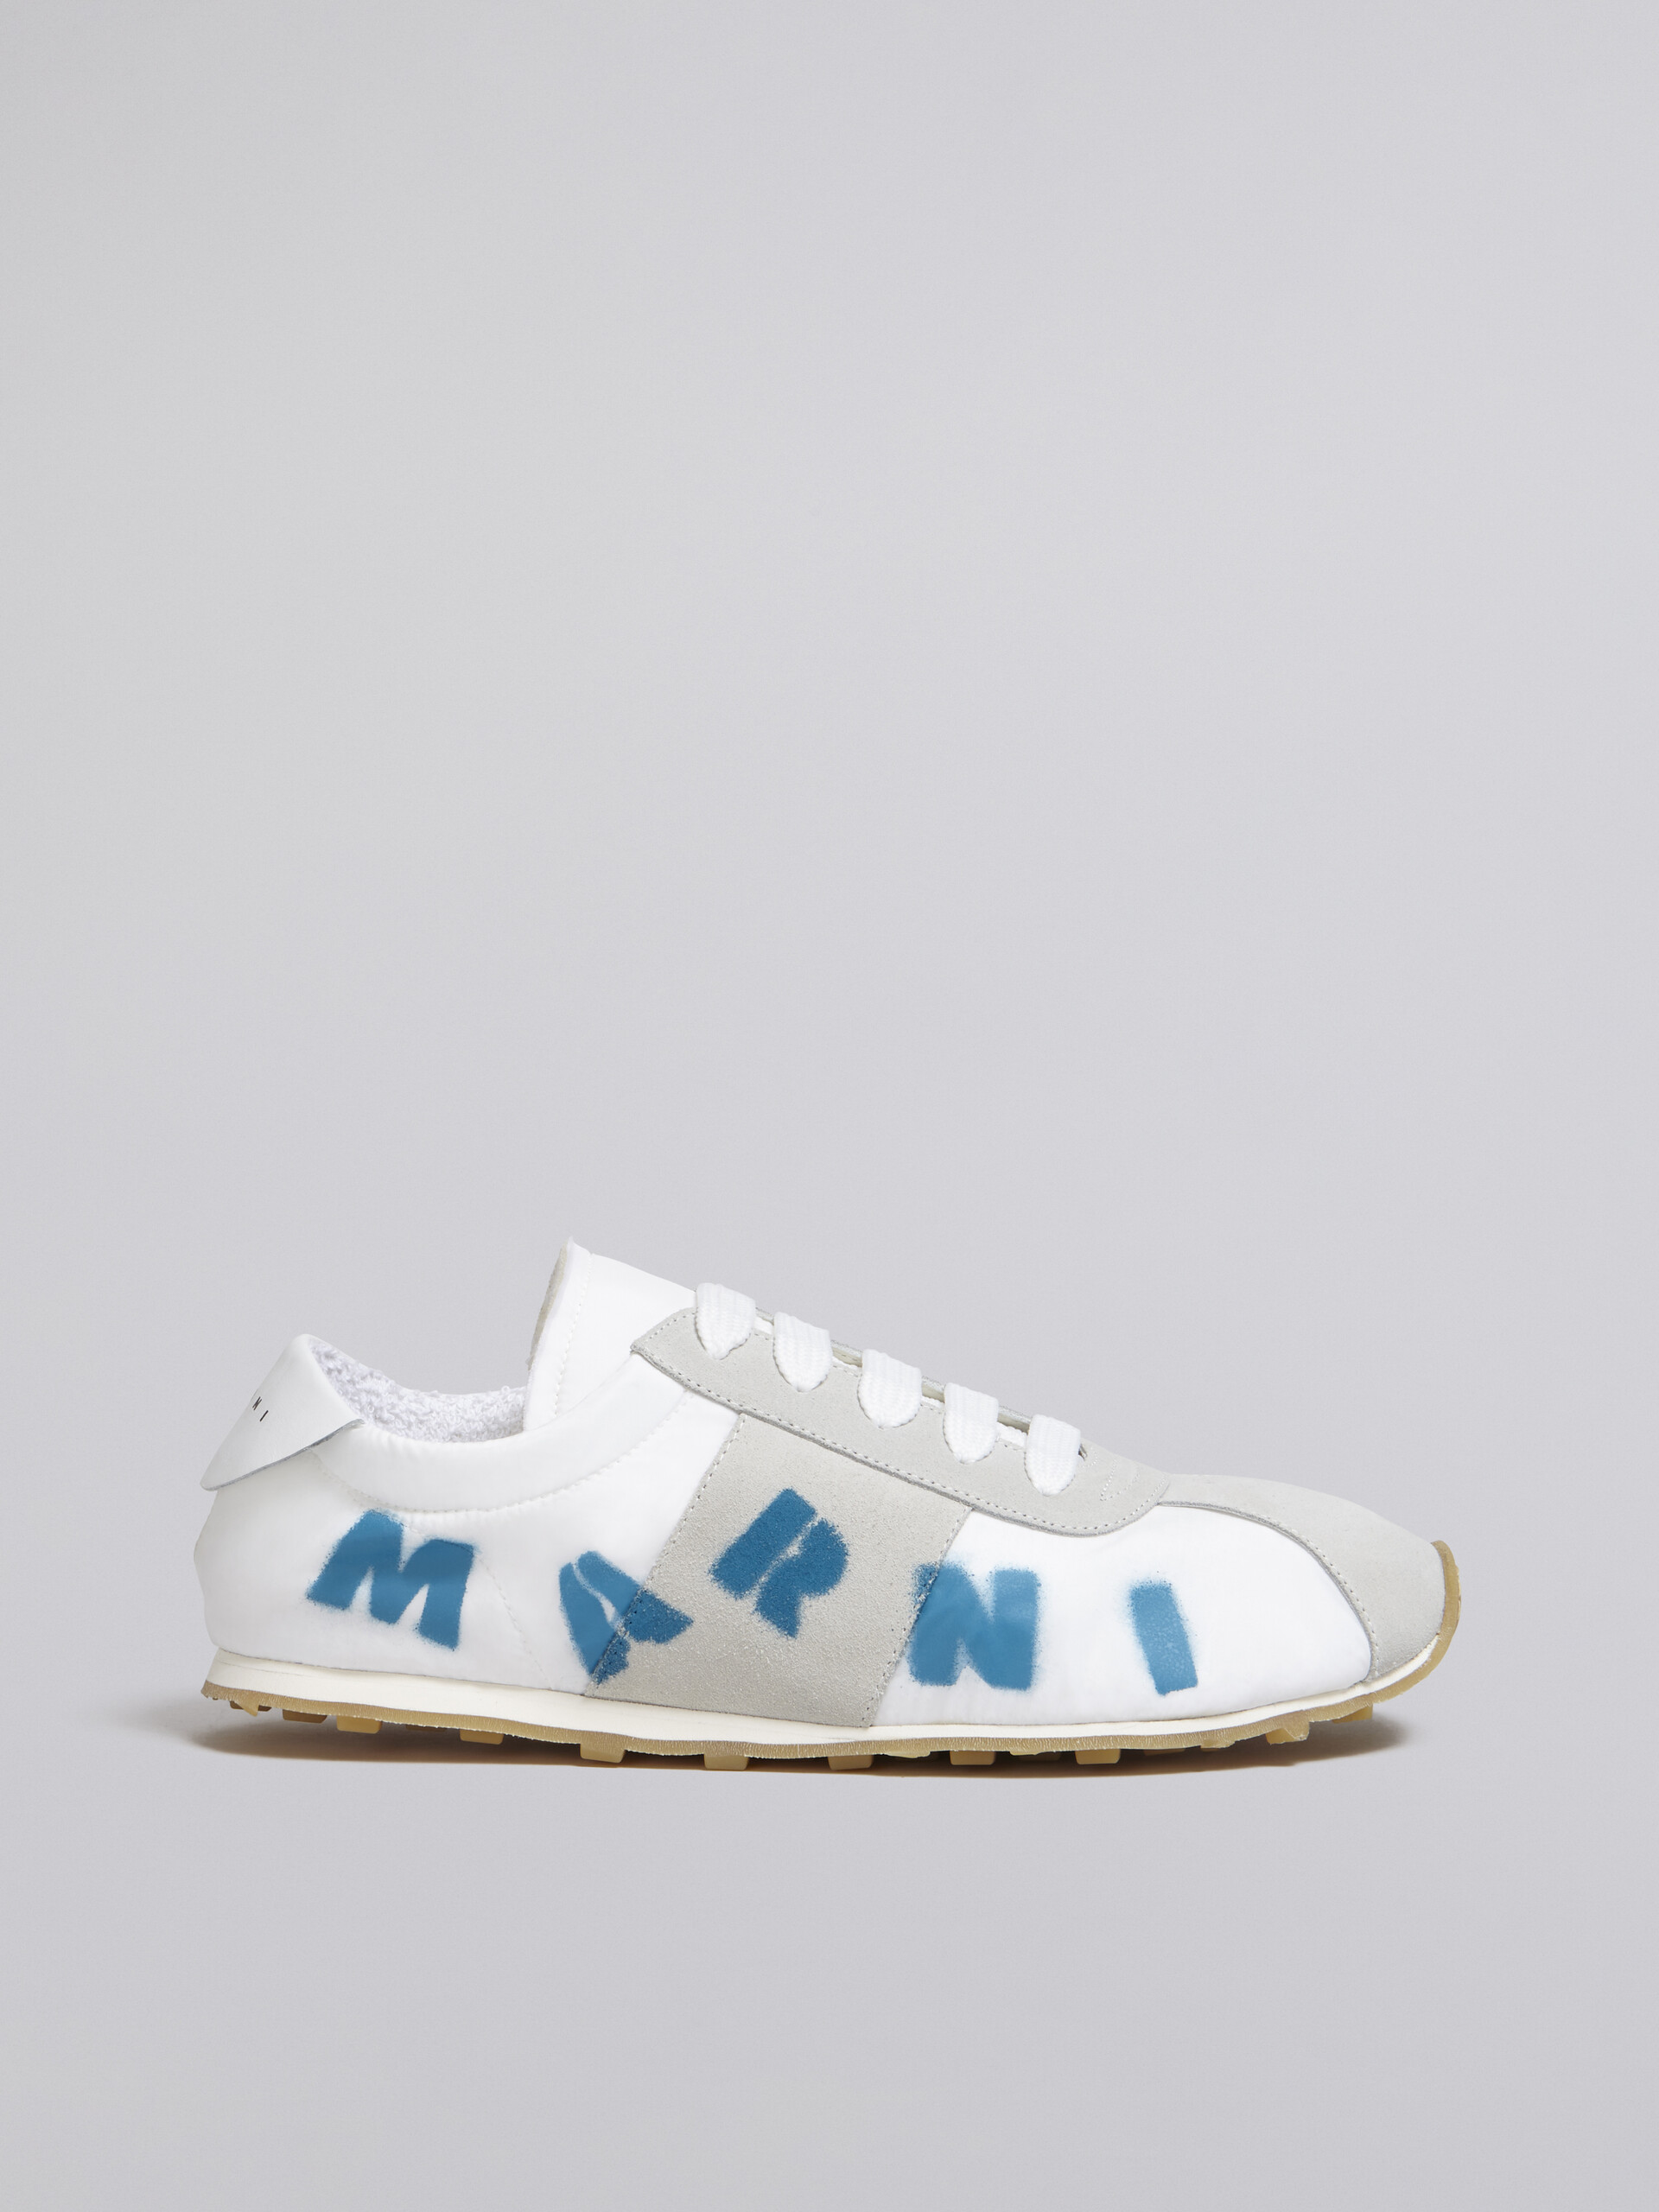 White polyamide sneaker with airbrushed Marni logo - Sneakers - Image 1